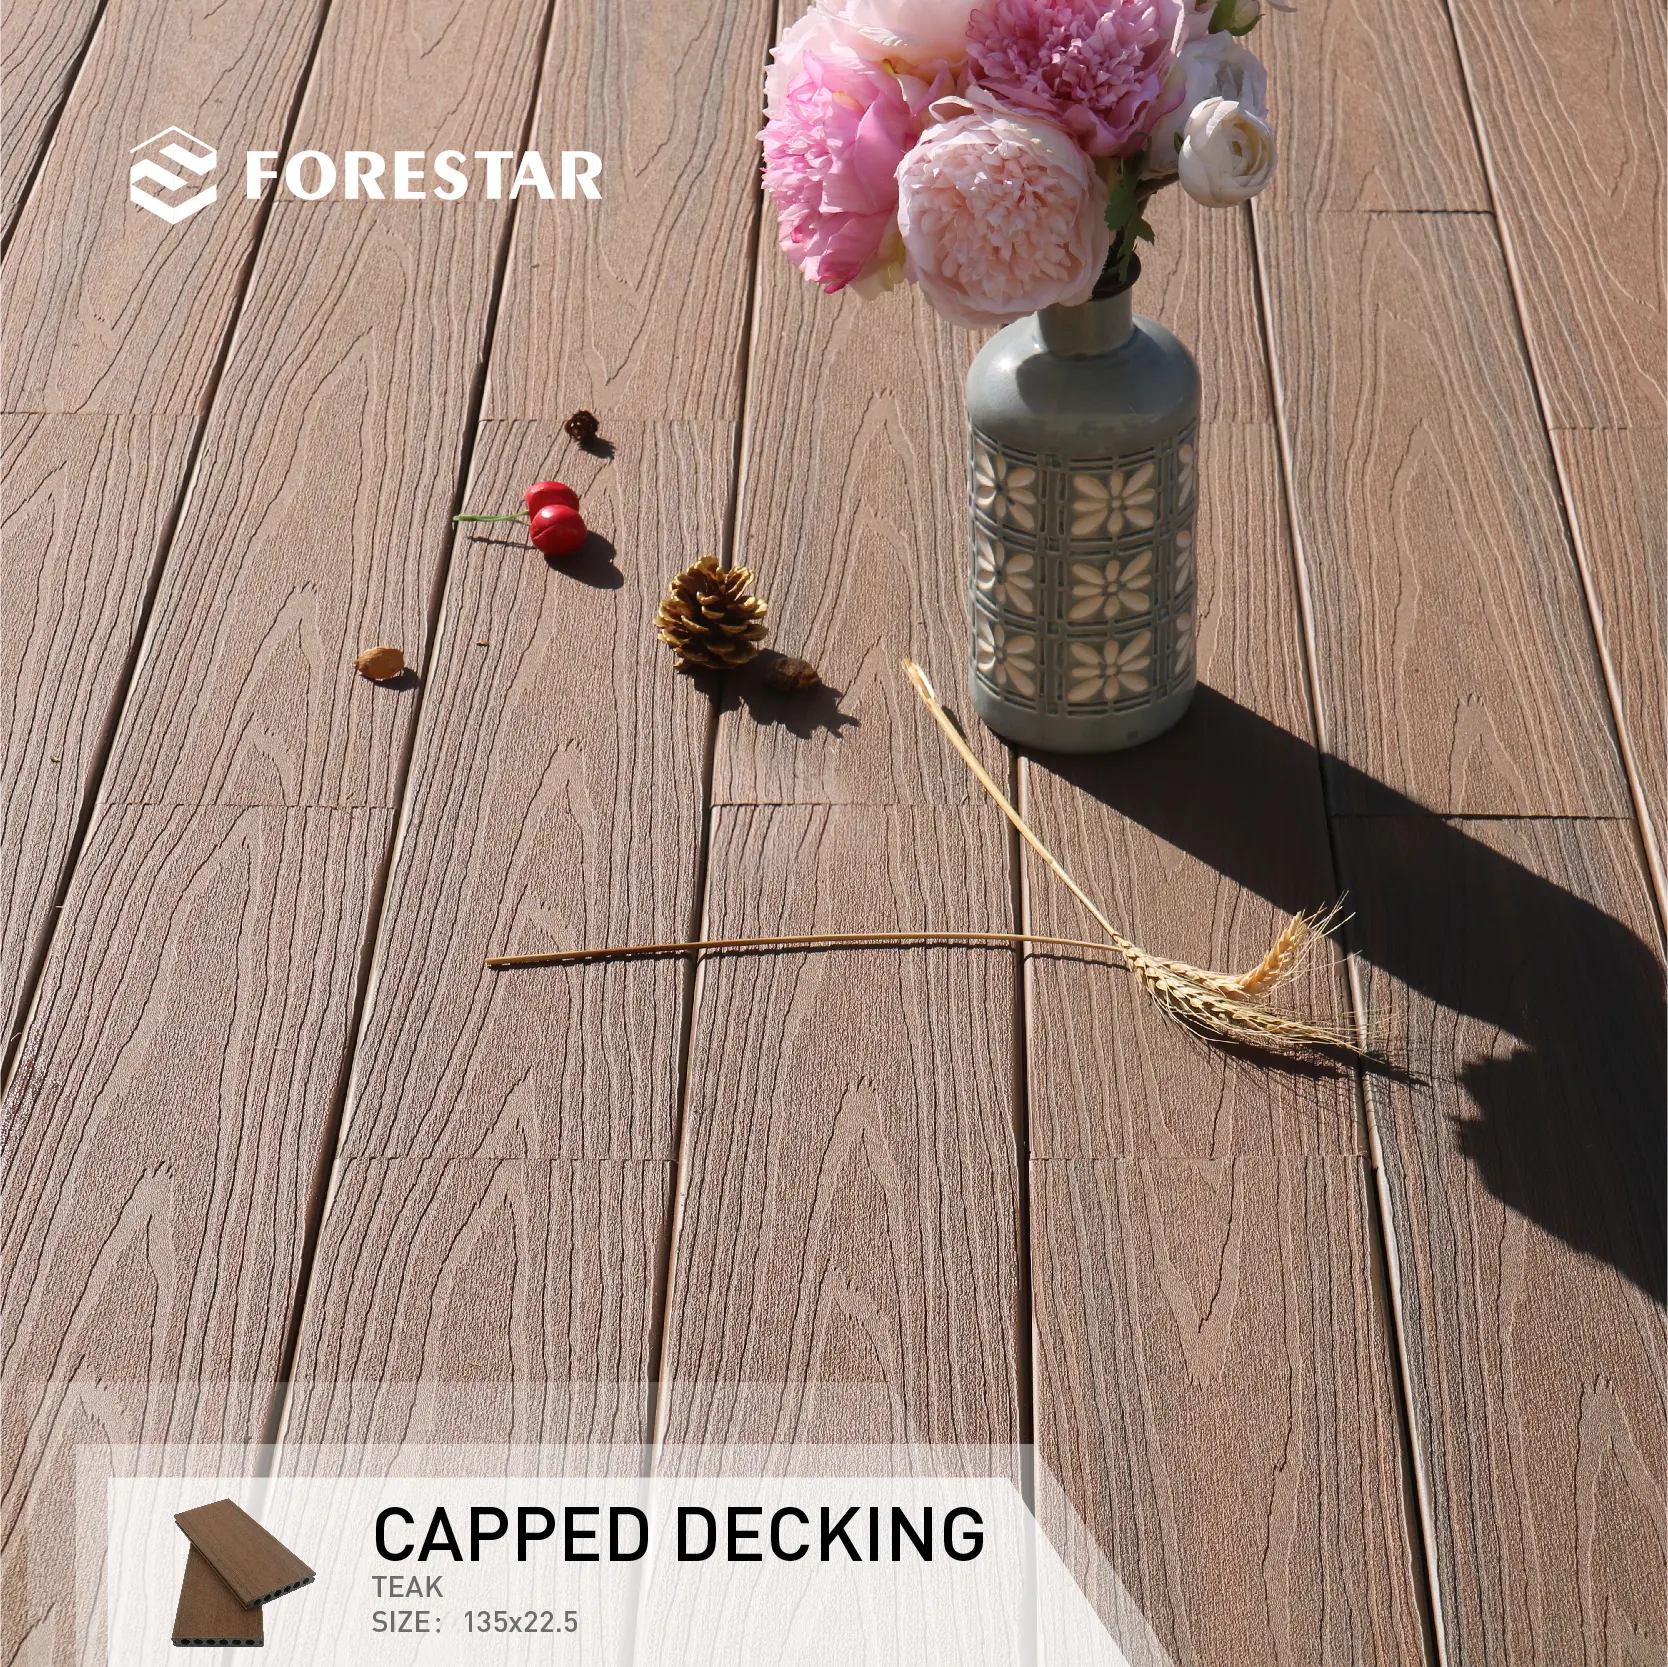 New Product Hard Wearing WPC Decking 3d Wooden Flooring PVC Flooring Decking WPC Decking Eco-friendly Wood Plastic Composite